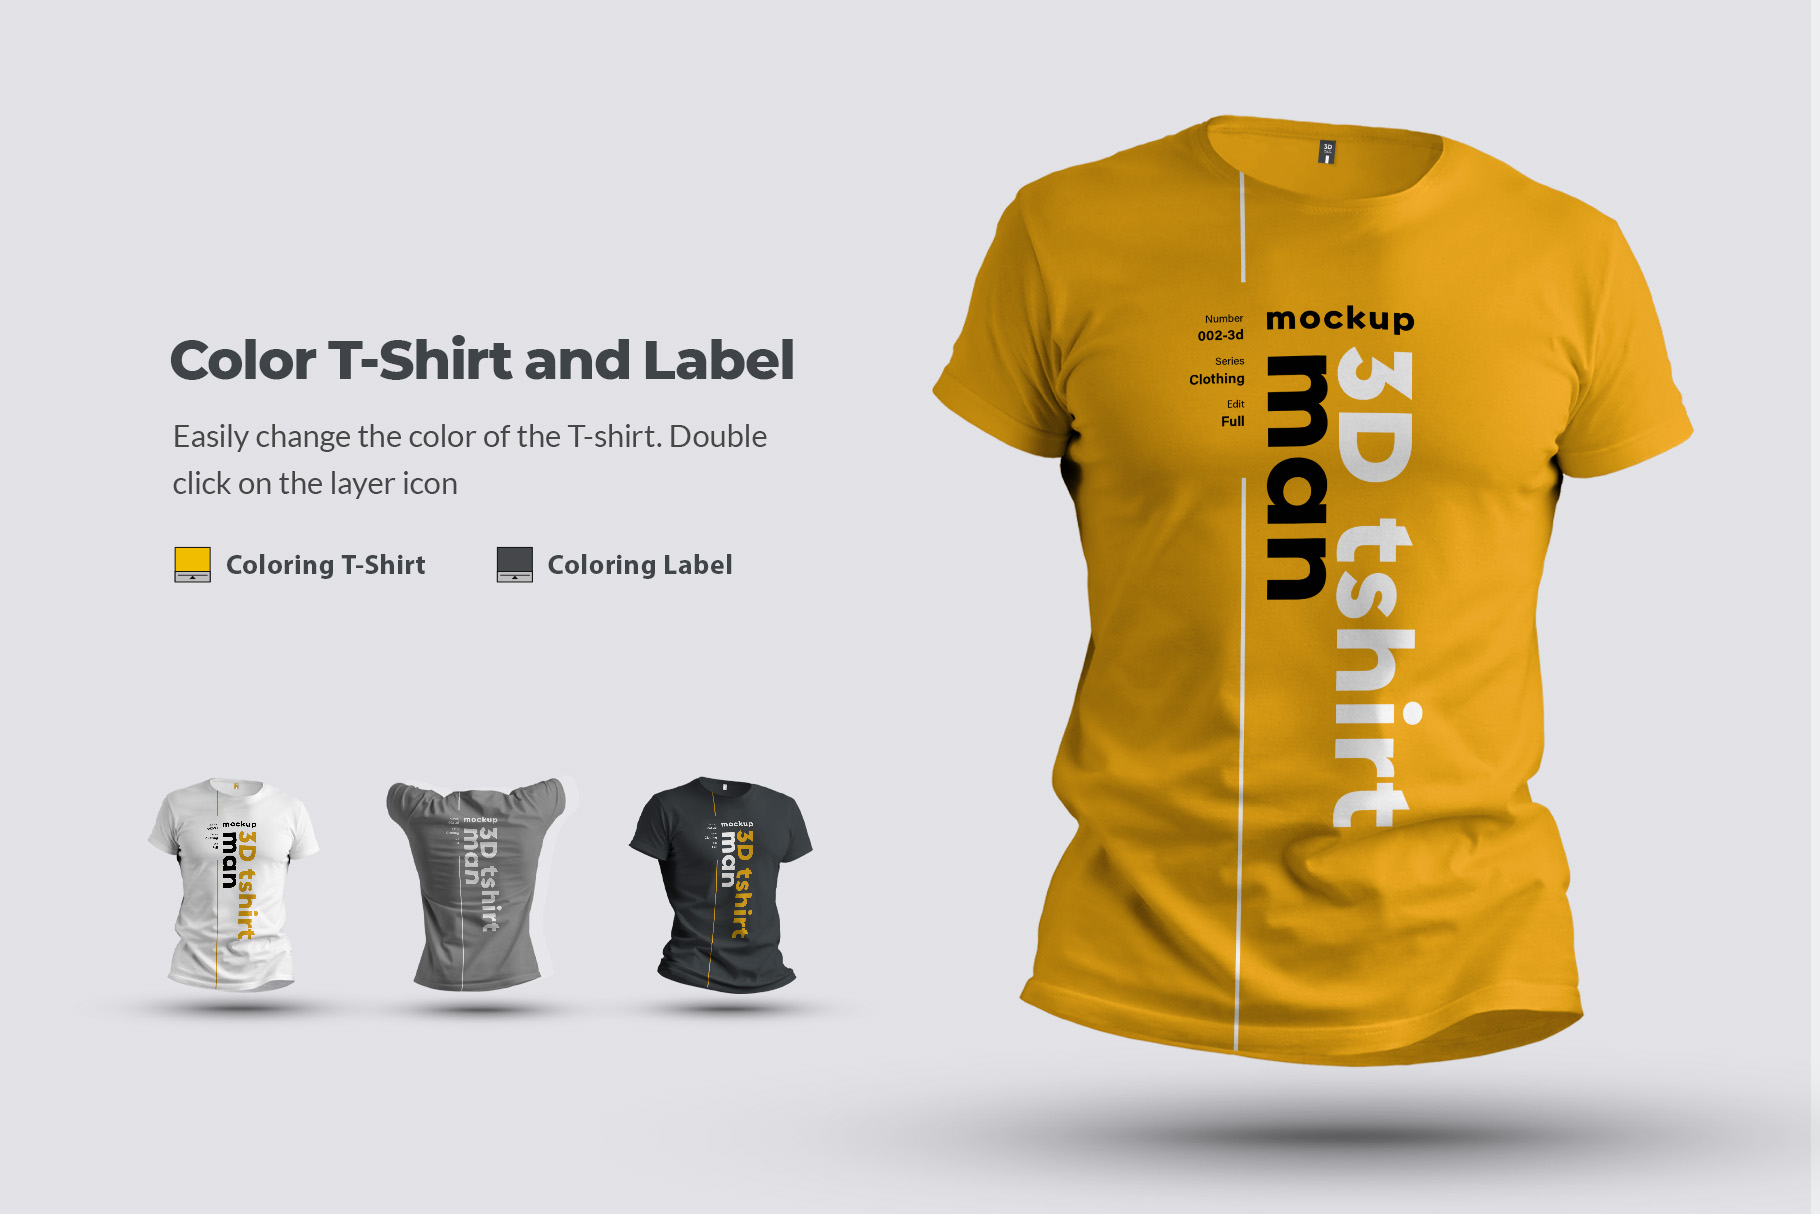 8 Mockups 3D T-Shirts color and label.